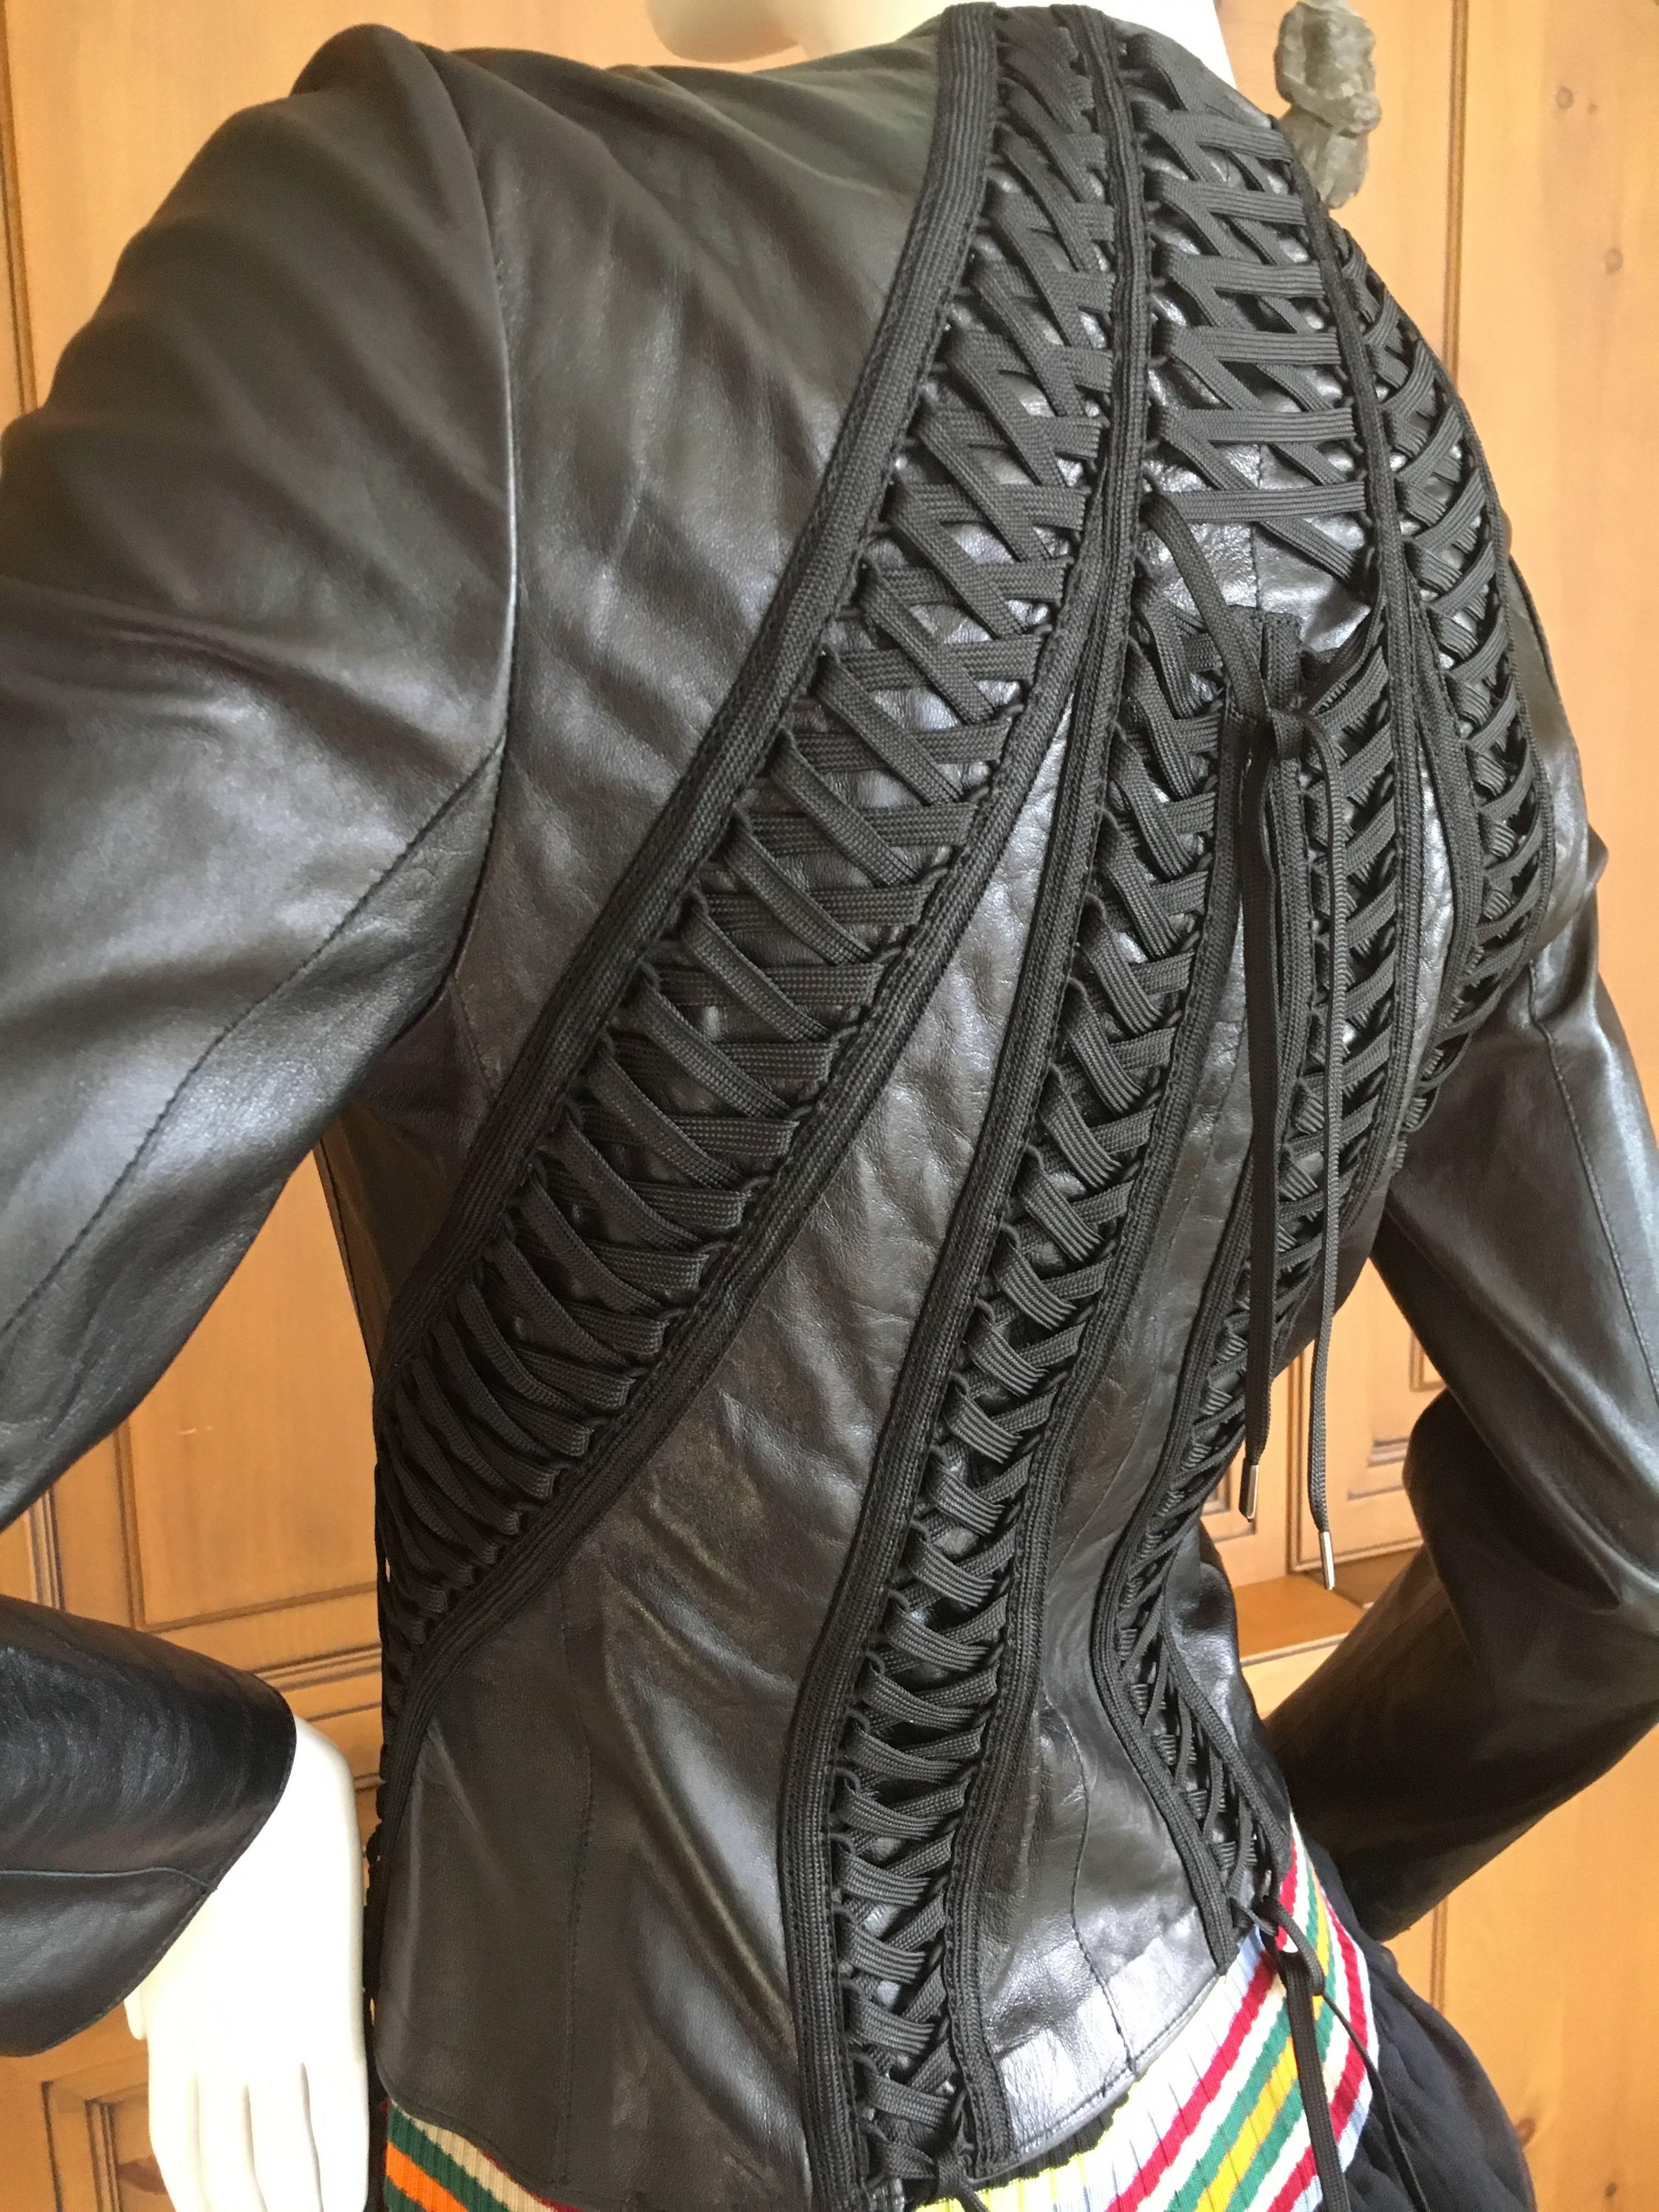 Christian Dior Black Lambskin Leather Corset Laced Bondage Jacket by Galliano In Excellent Condition For Sale In Cloverdale, CA